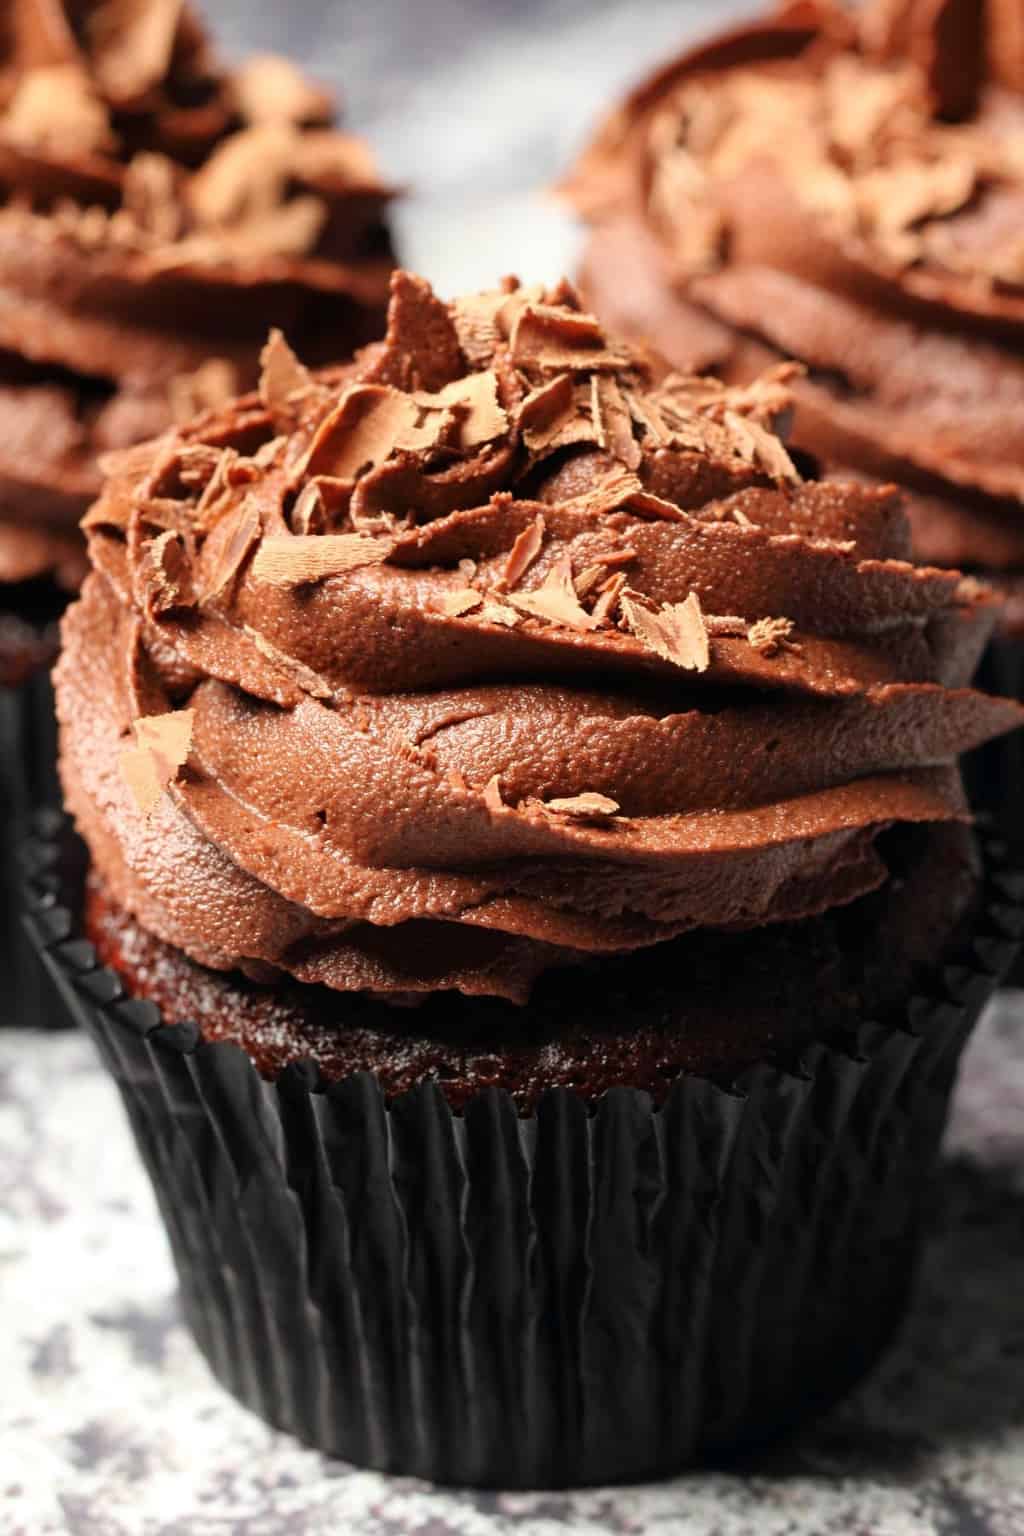 Classic vegan chocolate cupcakes topped with vegan chocolate buttercream and chocolate shavings. 